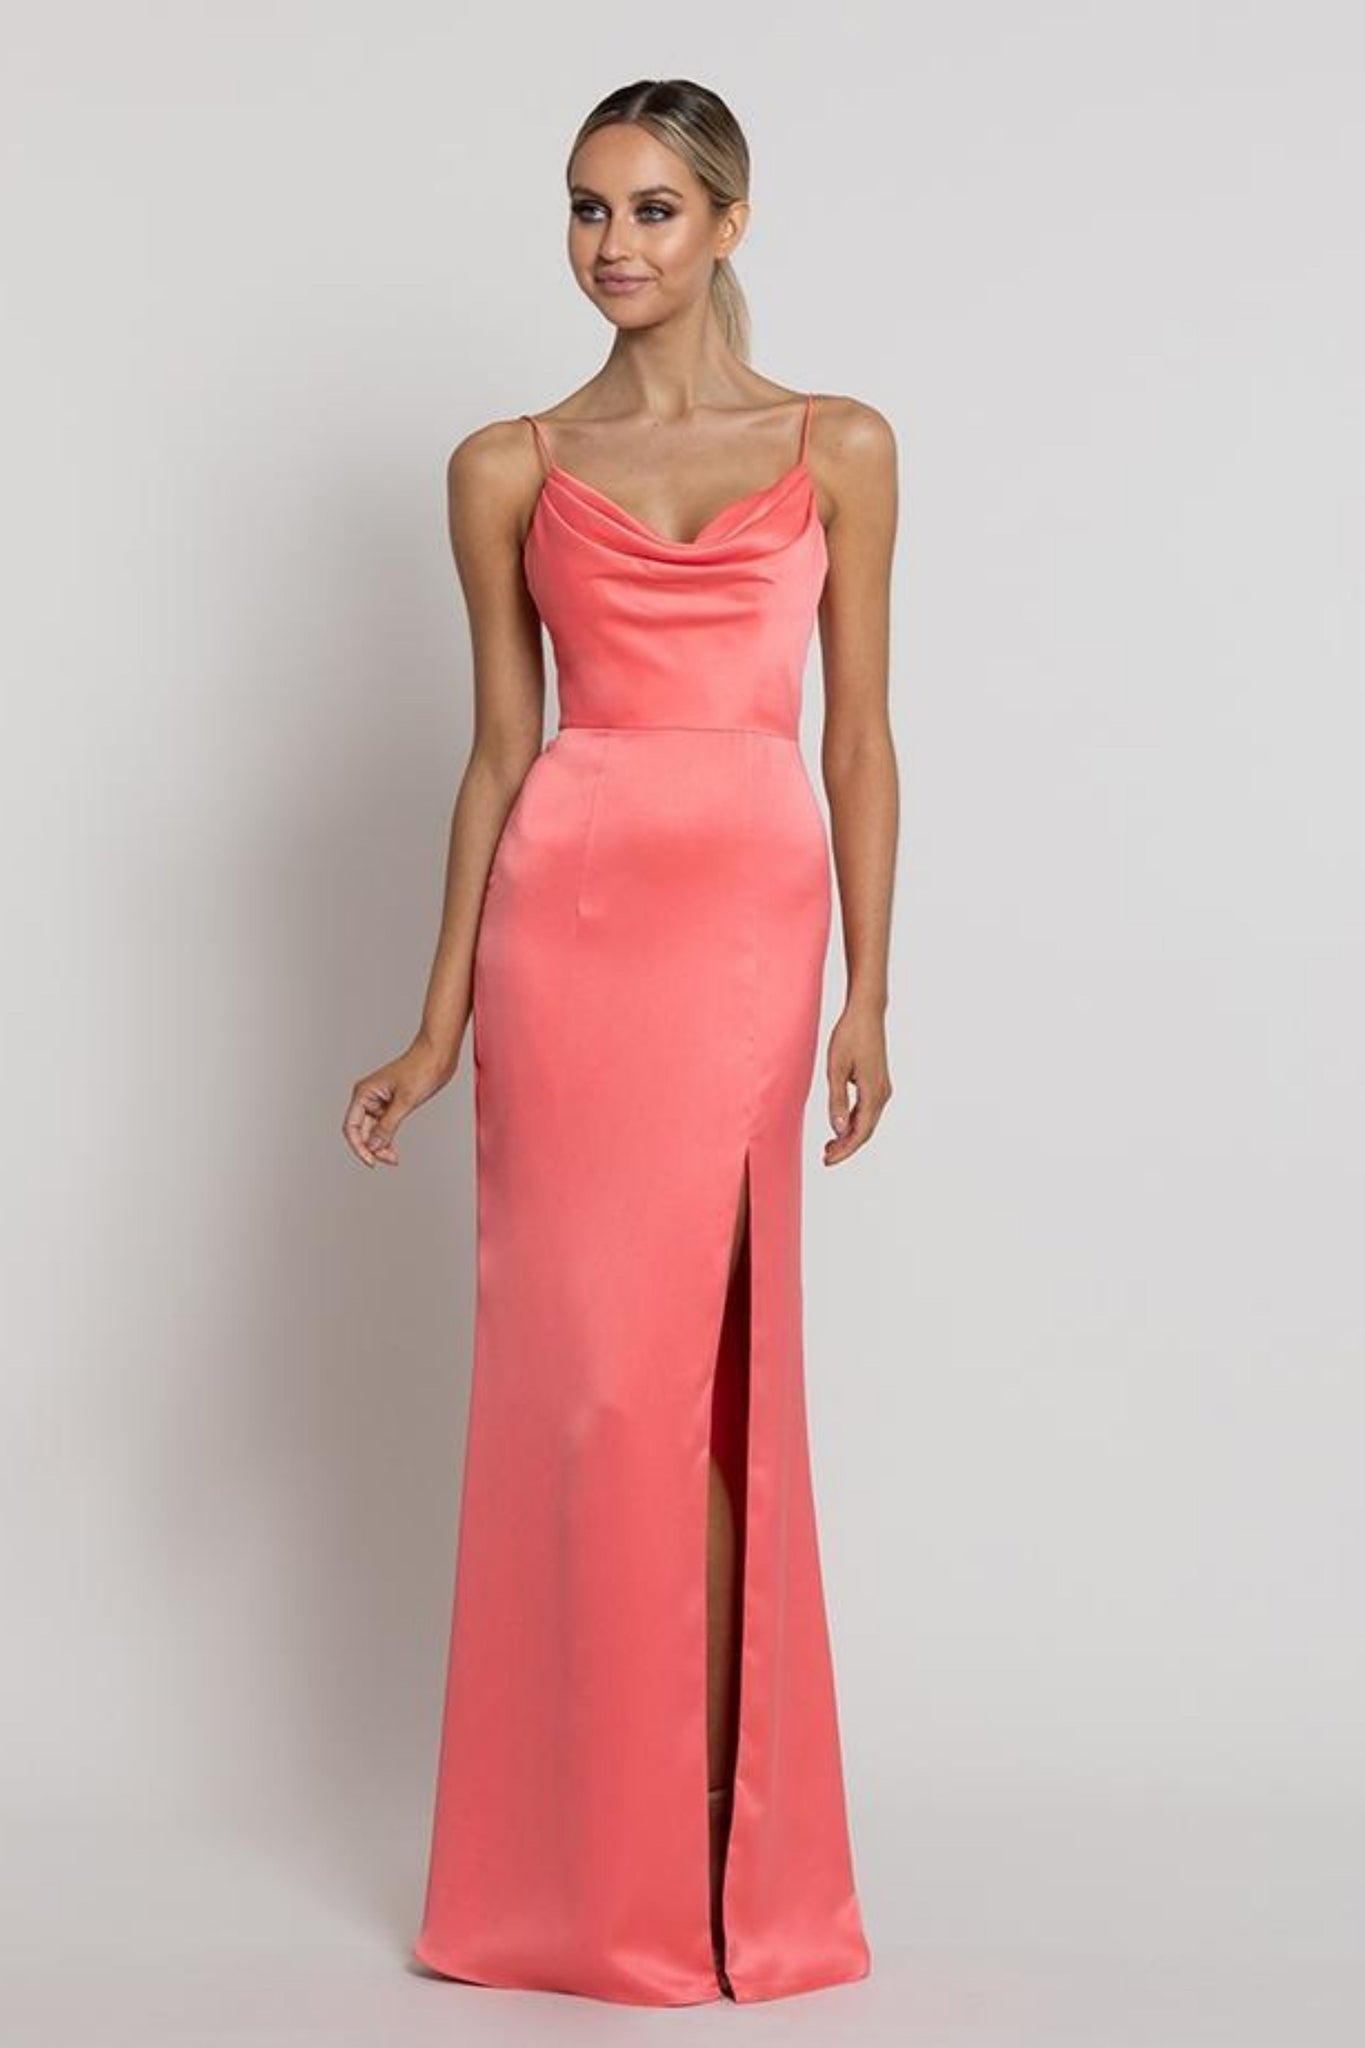 Lana Cowl Neck Gown - Coral